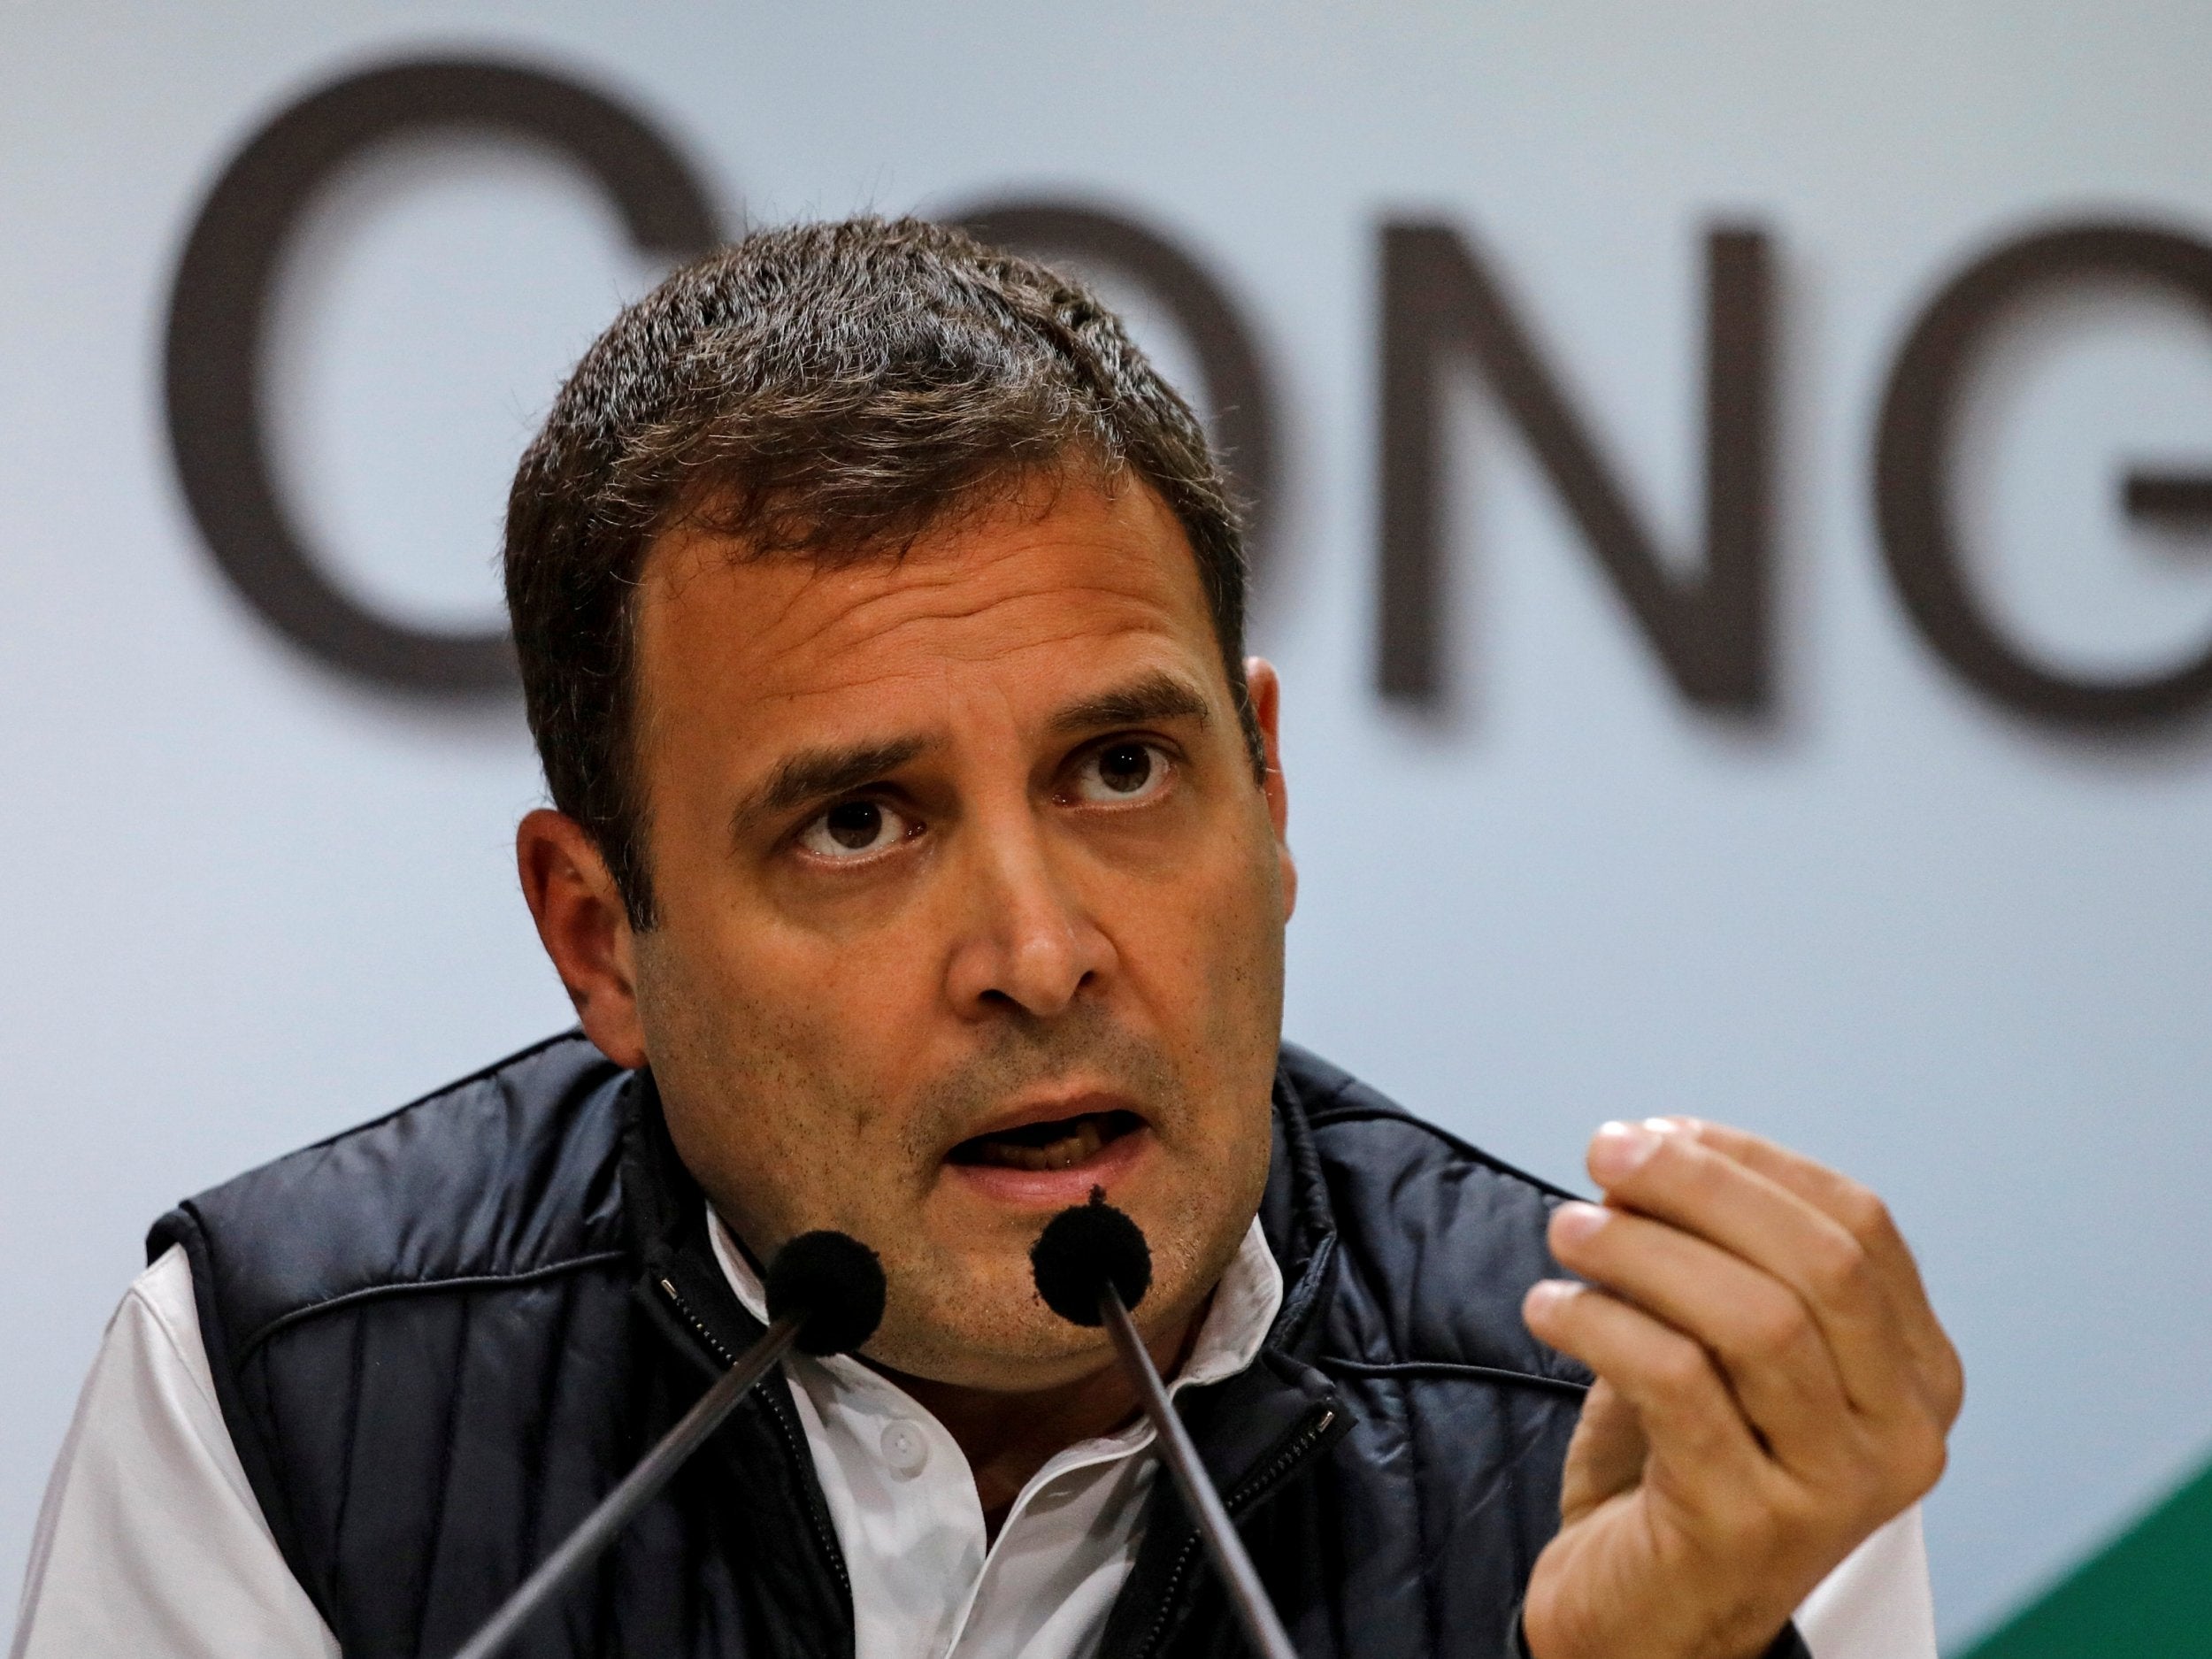 File: Rahul Gandhi, president of India's main opposition Congress party, speaks at a news conference